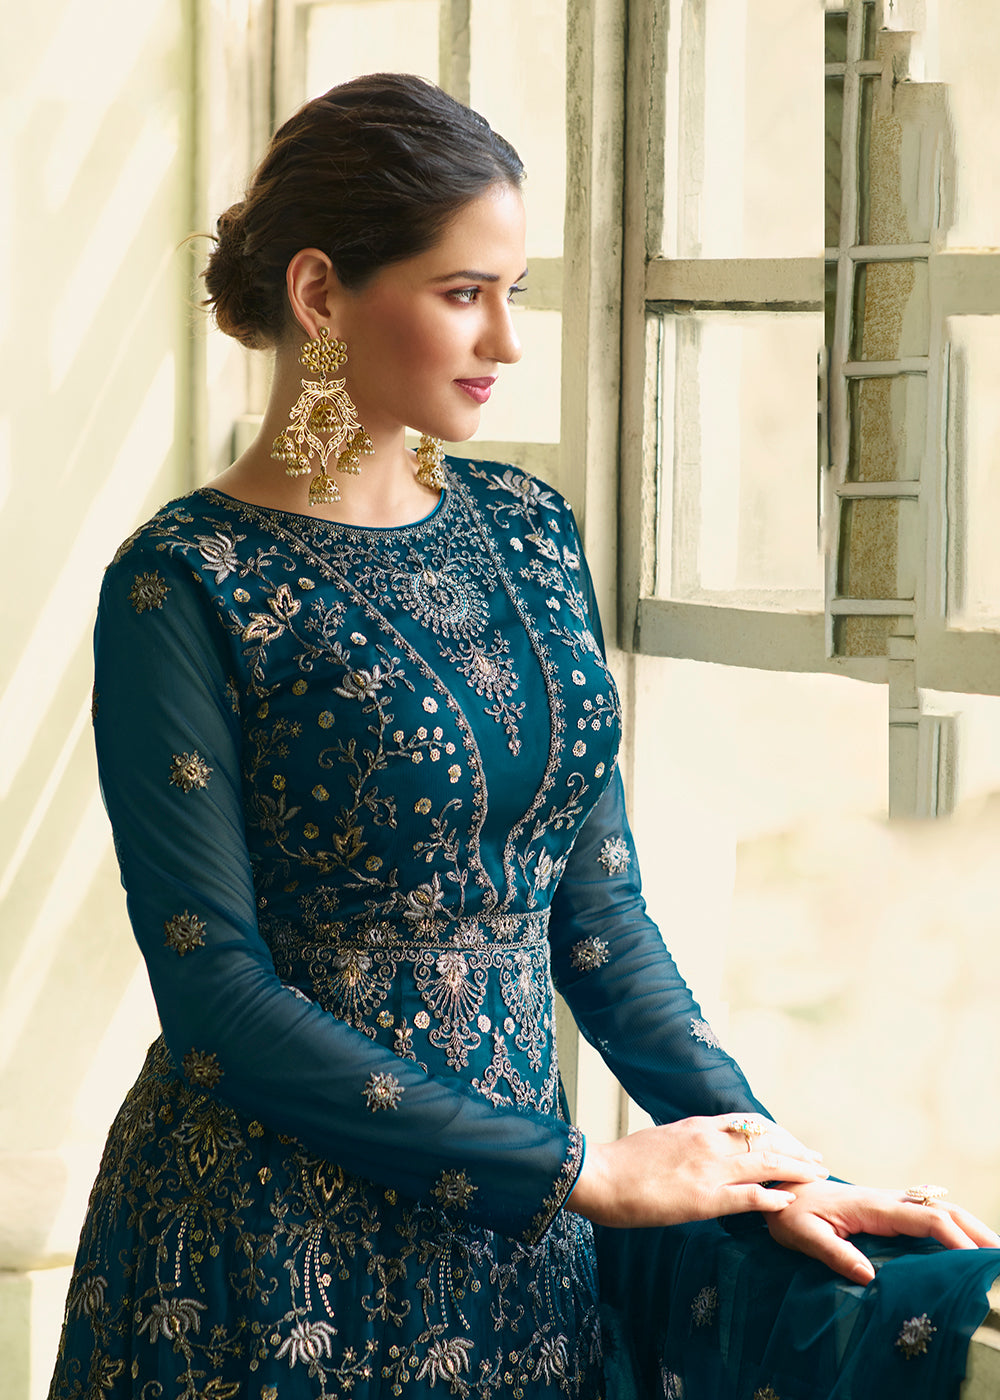 Buy Now Slit Style Fabulous Teal Zari Embroidered Party Festive Anarkali Suit Online in USA, UK, Australia, New Zealand, Canada & Worldwide at Empress Clothing. 